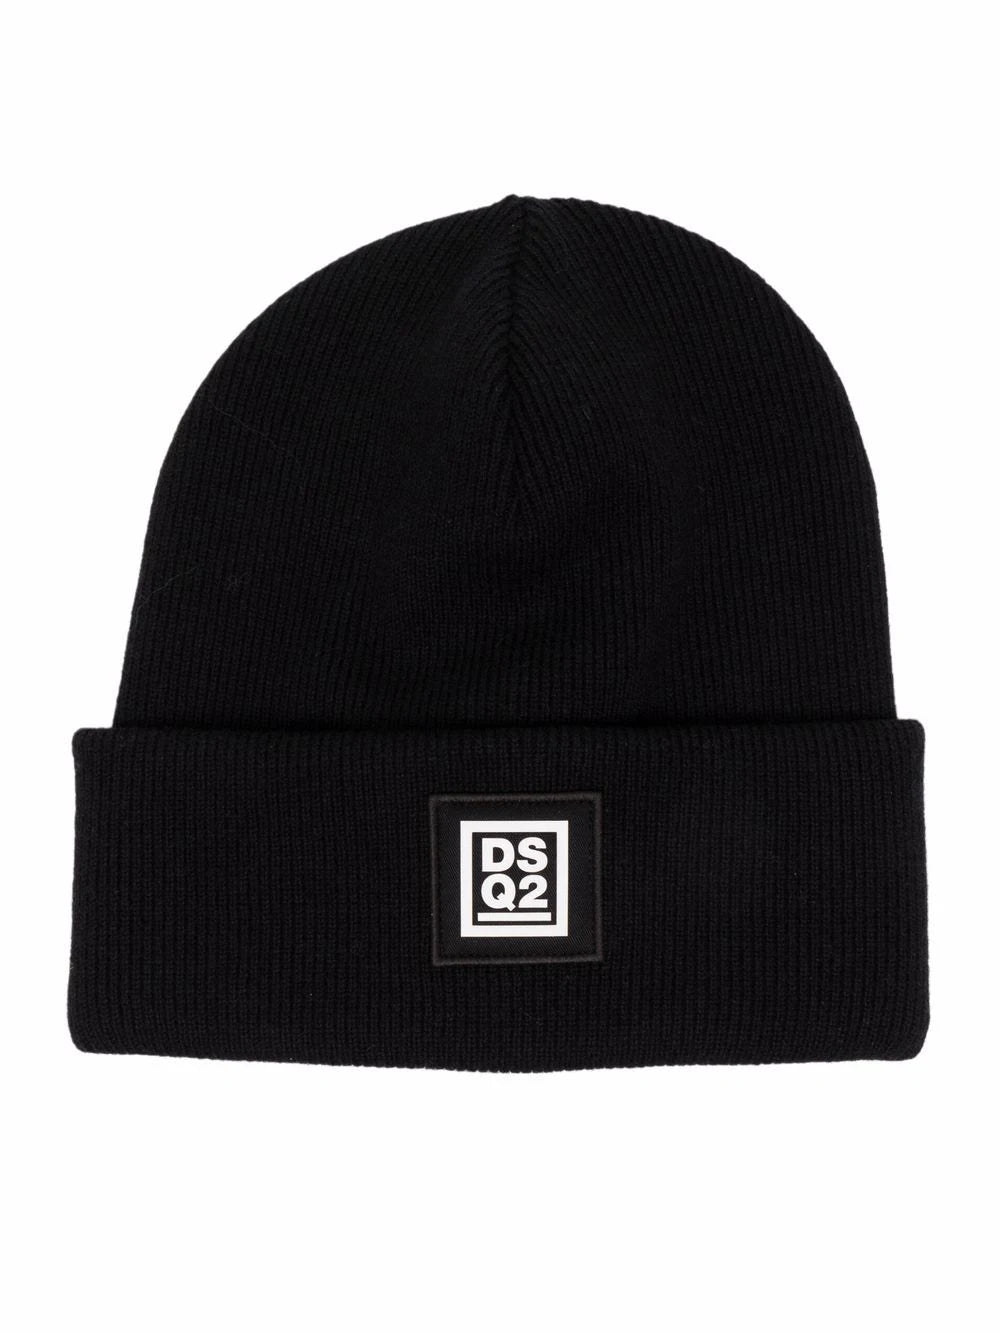 Dsquared2 Logo Patch Knitted Beanie Black